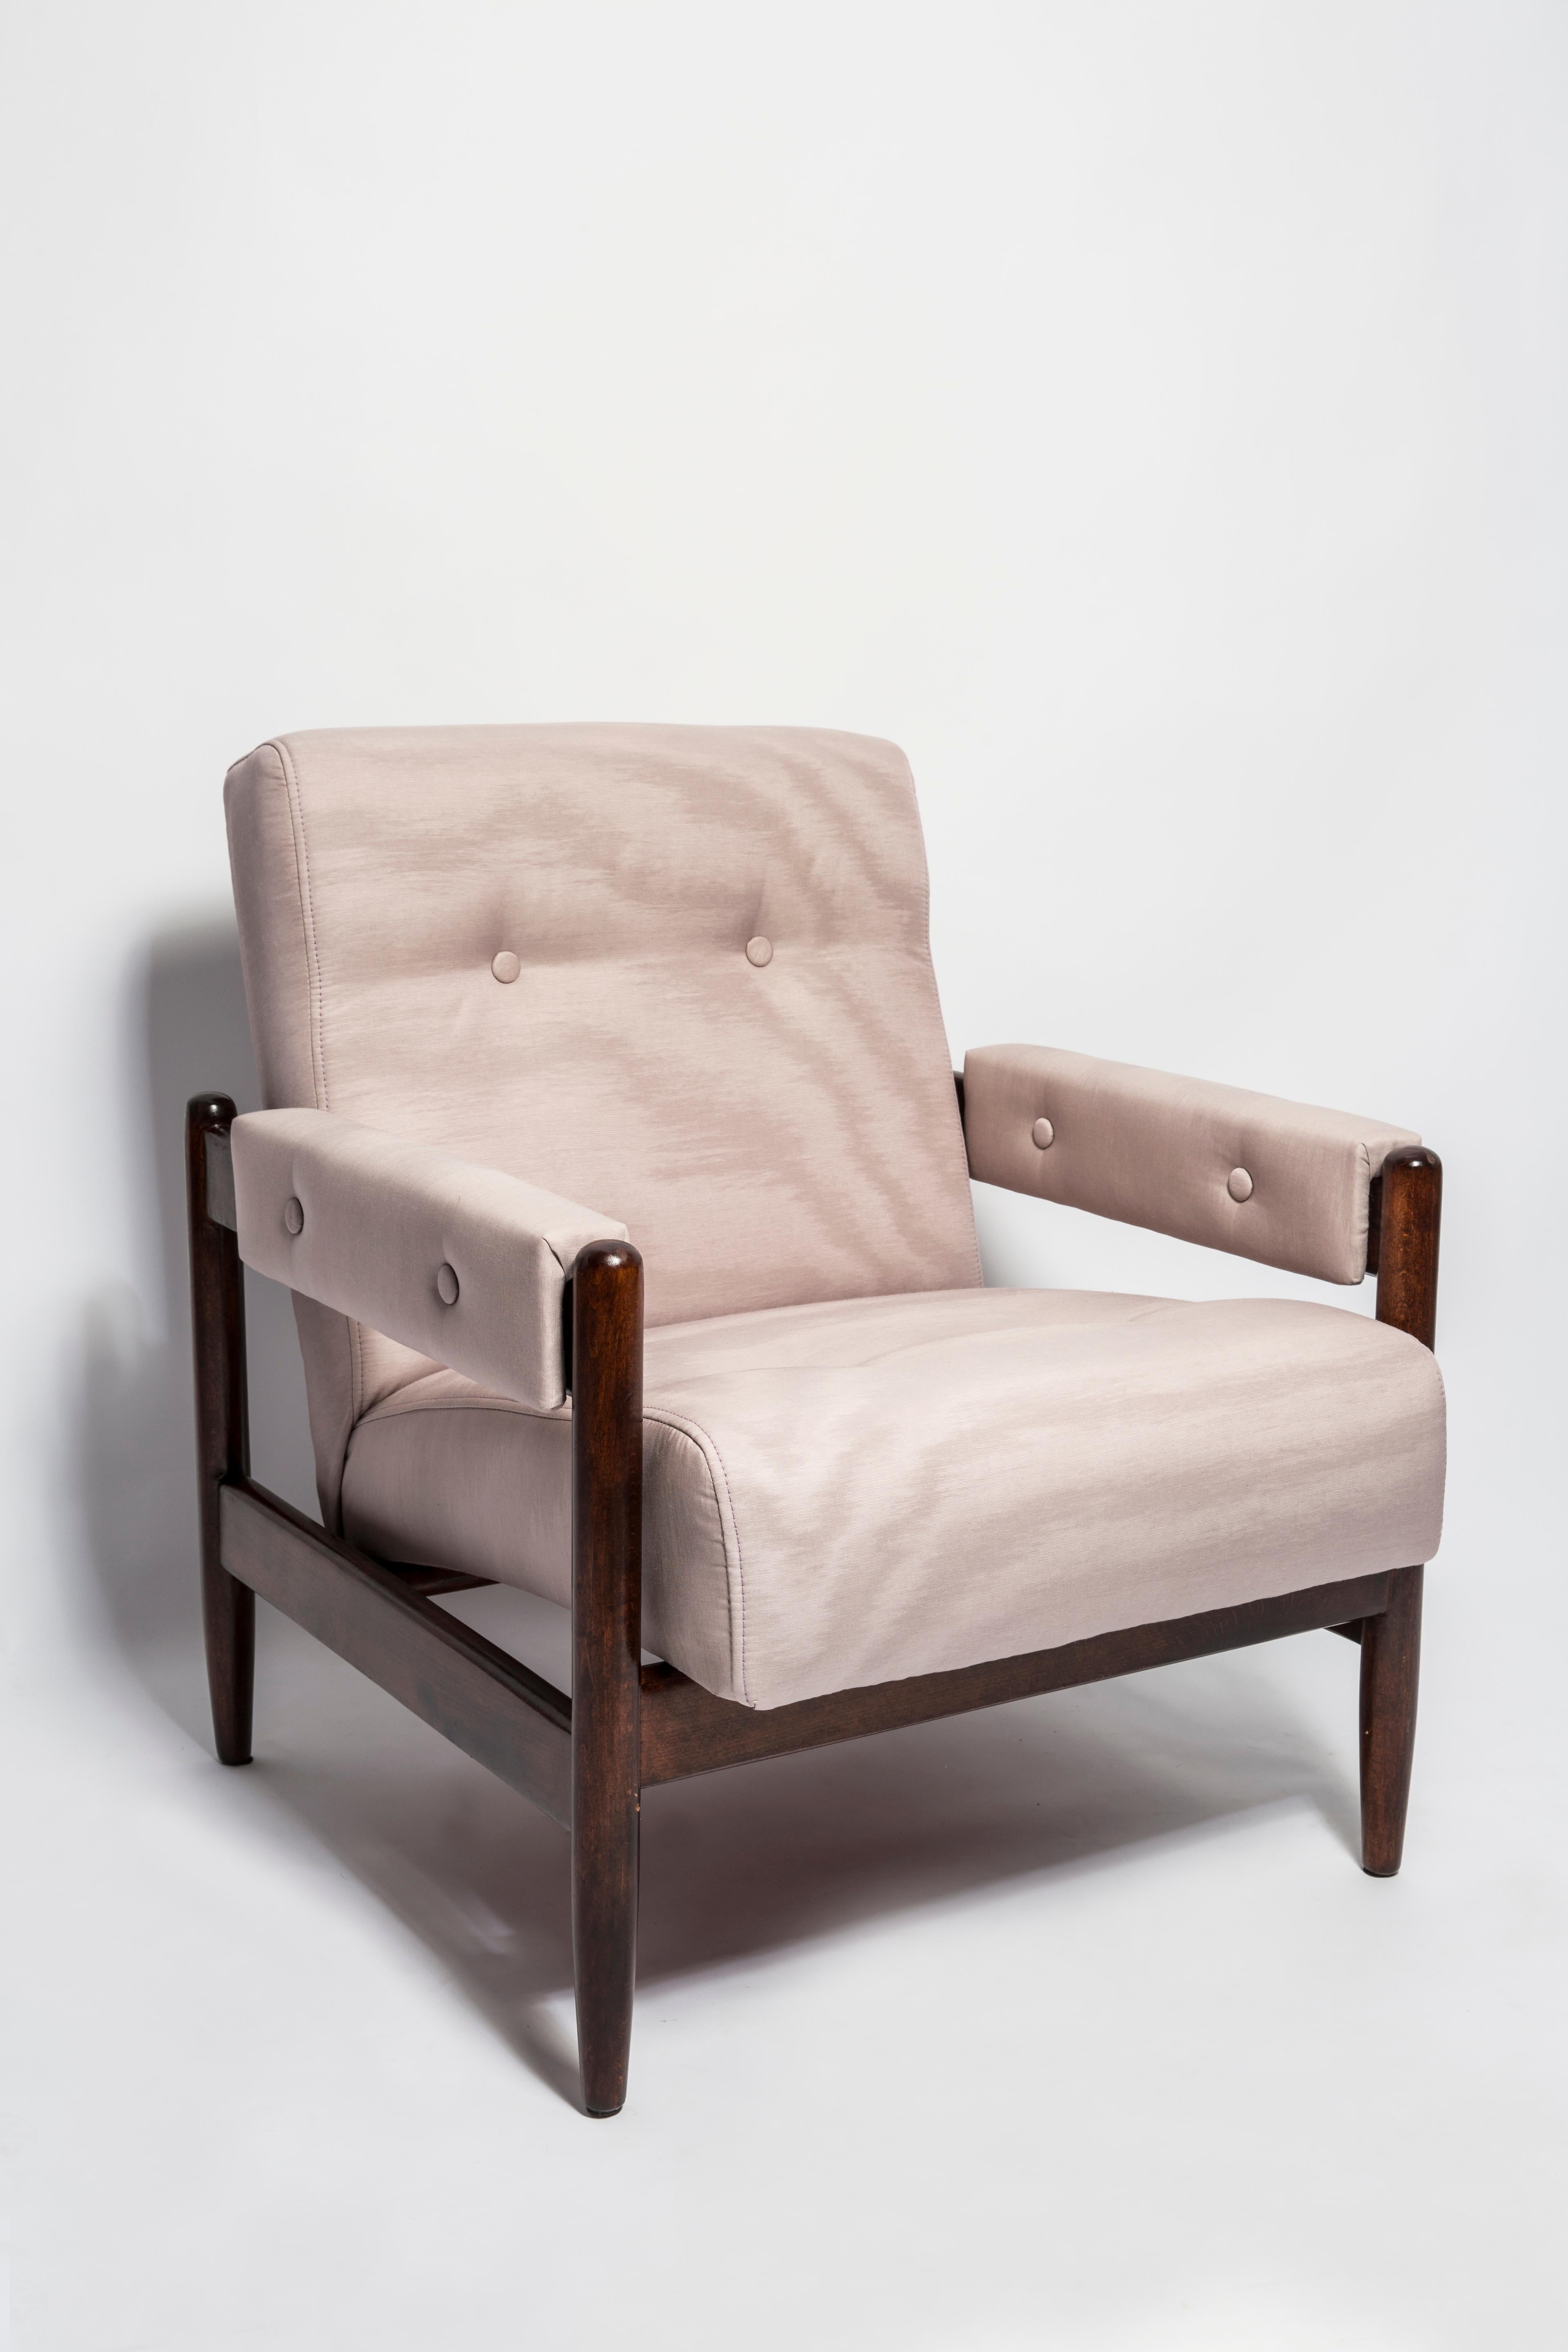 A wonderful armchair made in the 1960s in Poland. Stabile design of the furniture and a comfortable seat. Furniture after full upholstery renovation, refreshed woodwork. The whole is covered with high quality pleasant to the touch italian fabric.